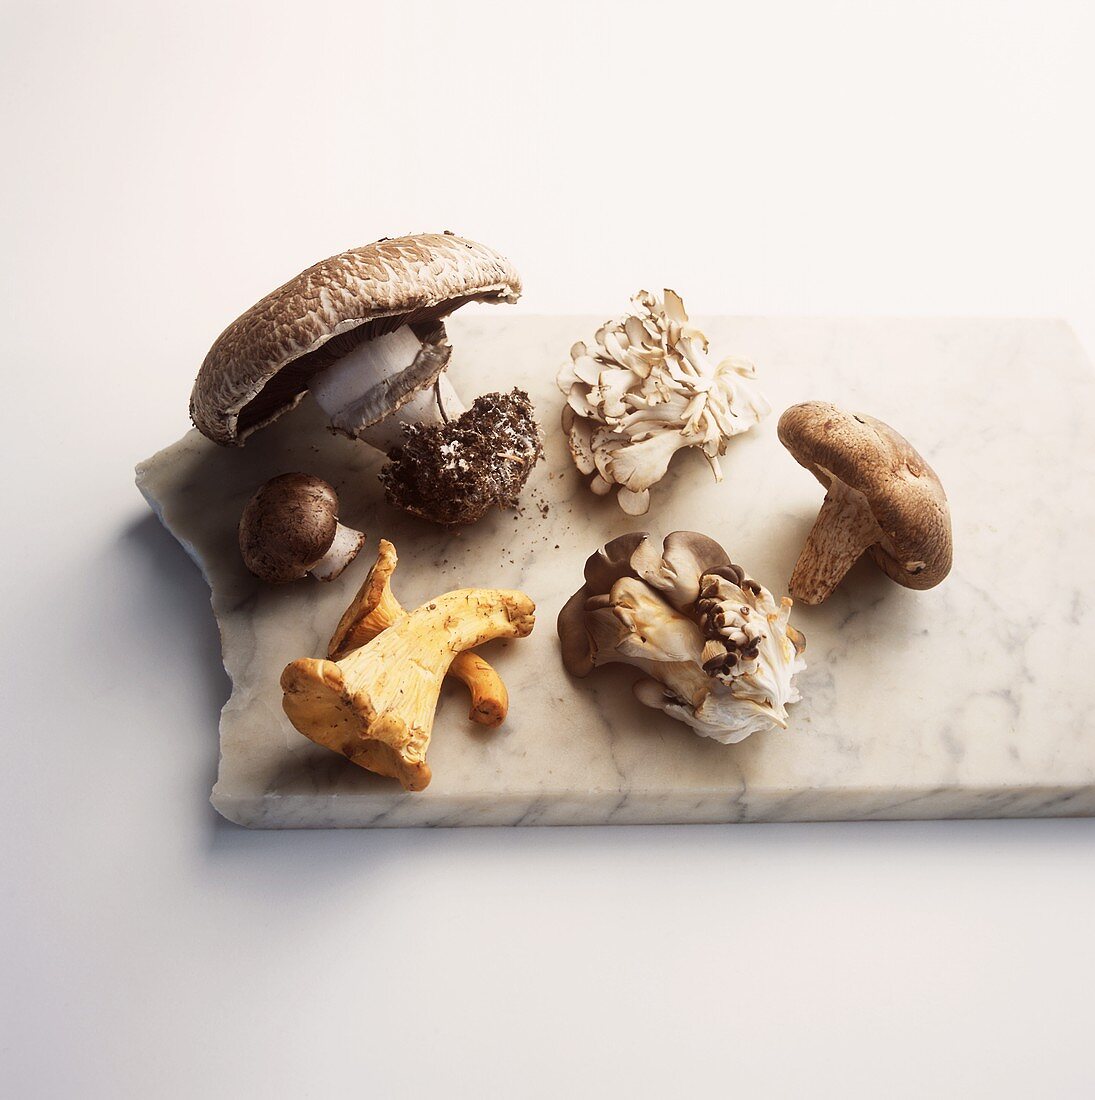 Six Types of Mushrooms on a Piece of Marble